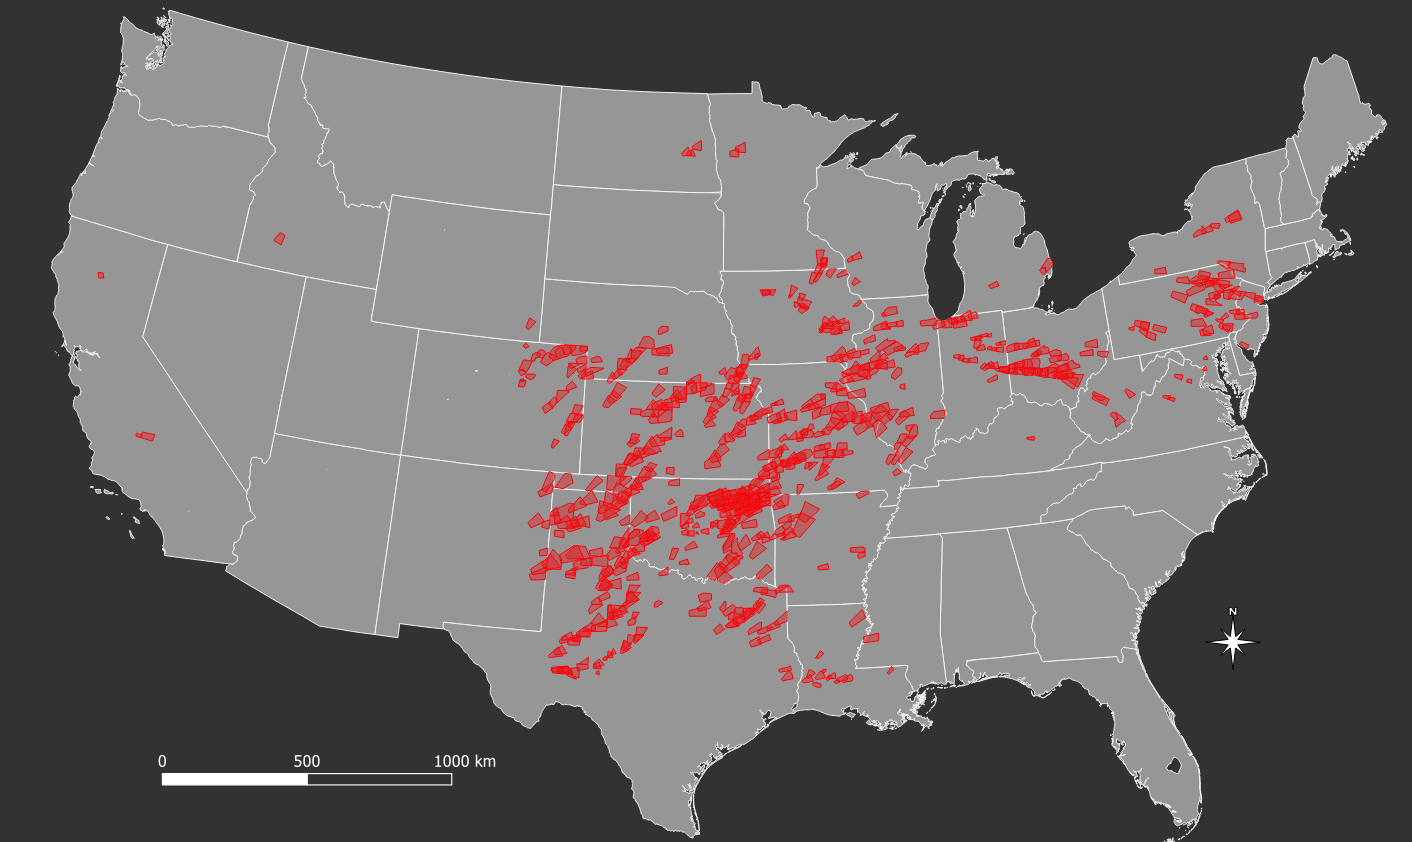 The 757 tornado warnings (red polygons) issued by NOAA’s National Weather Service from May 17 to May 30 of this year. (Credit: Northern Illinois University)